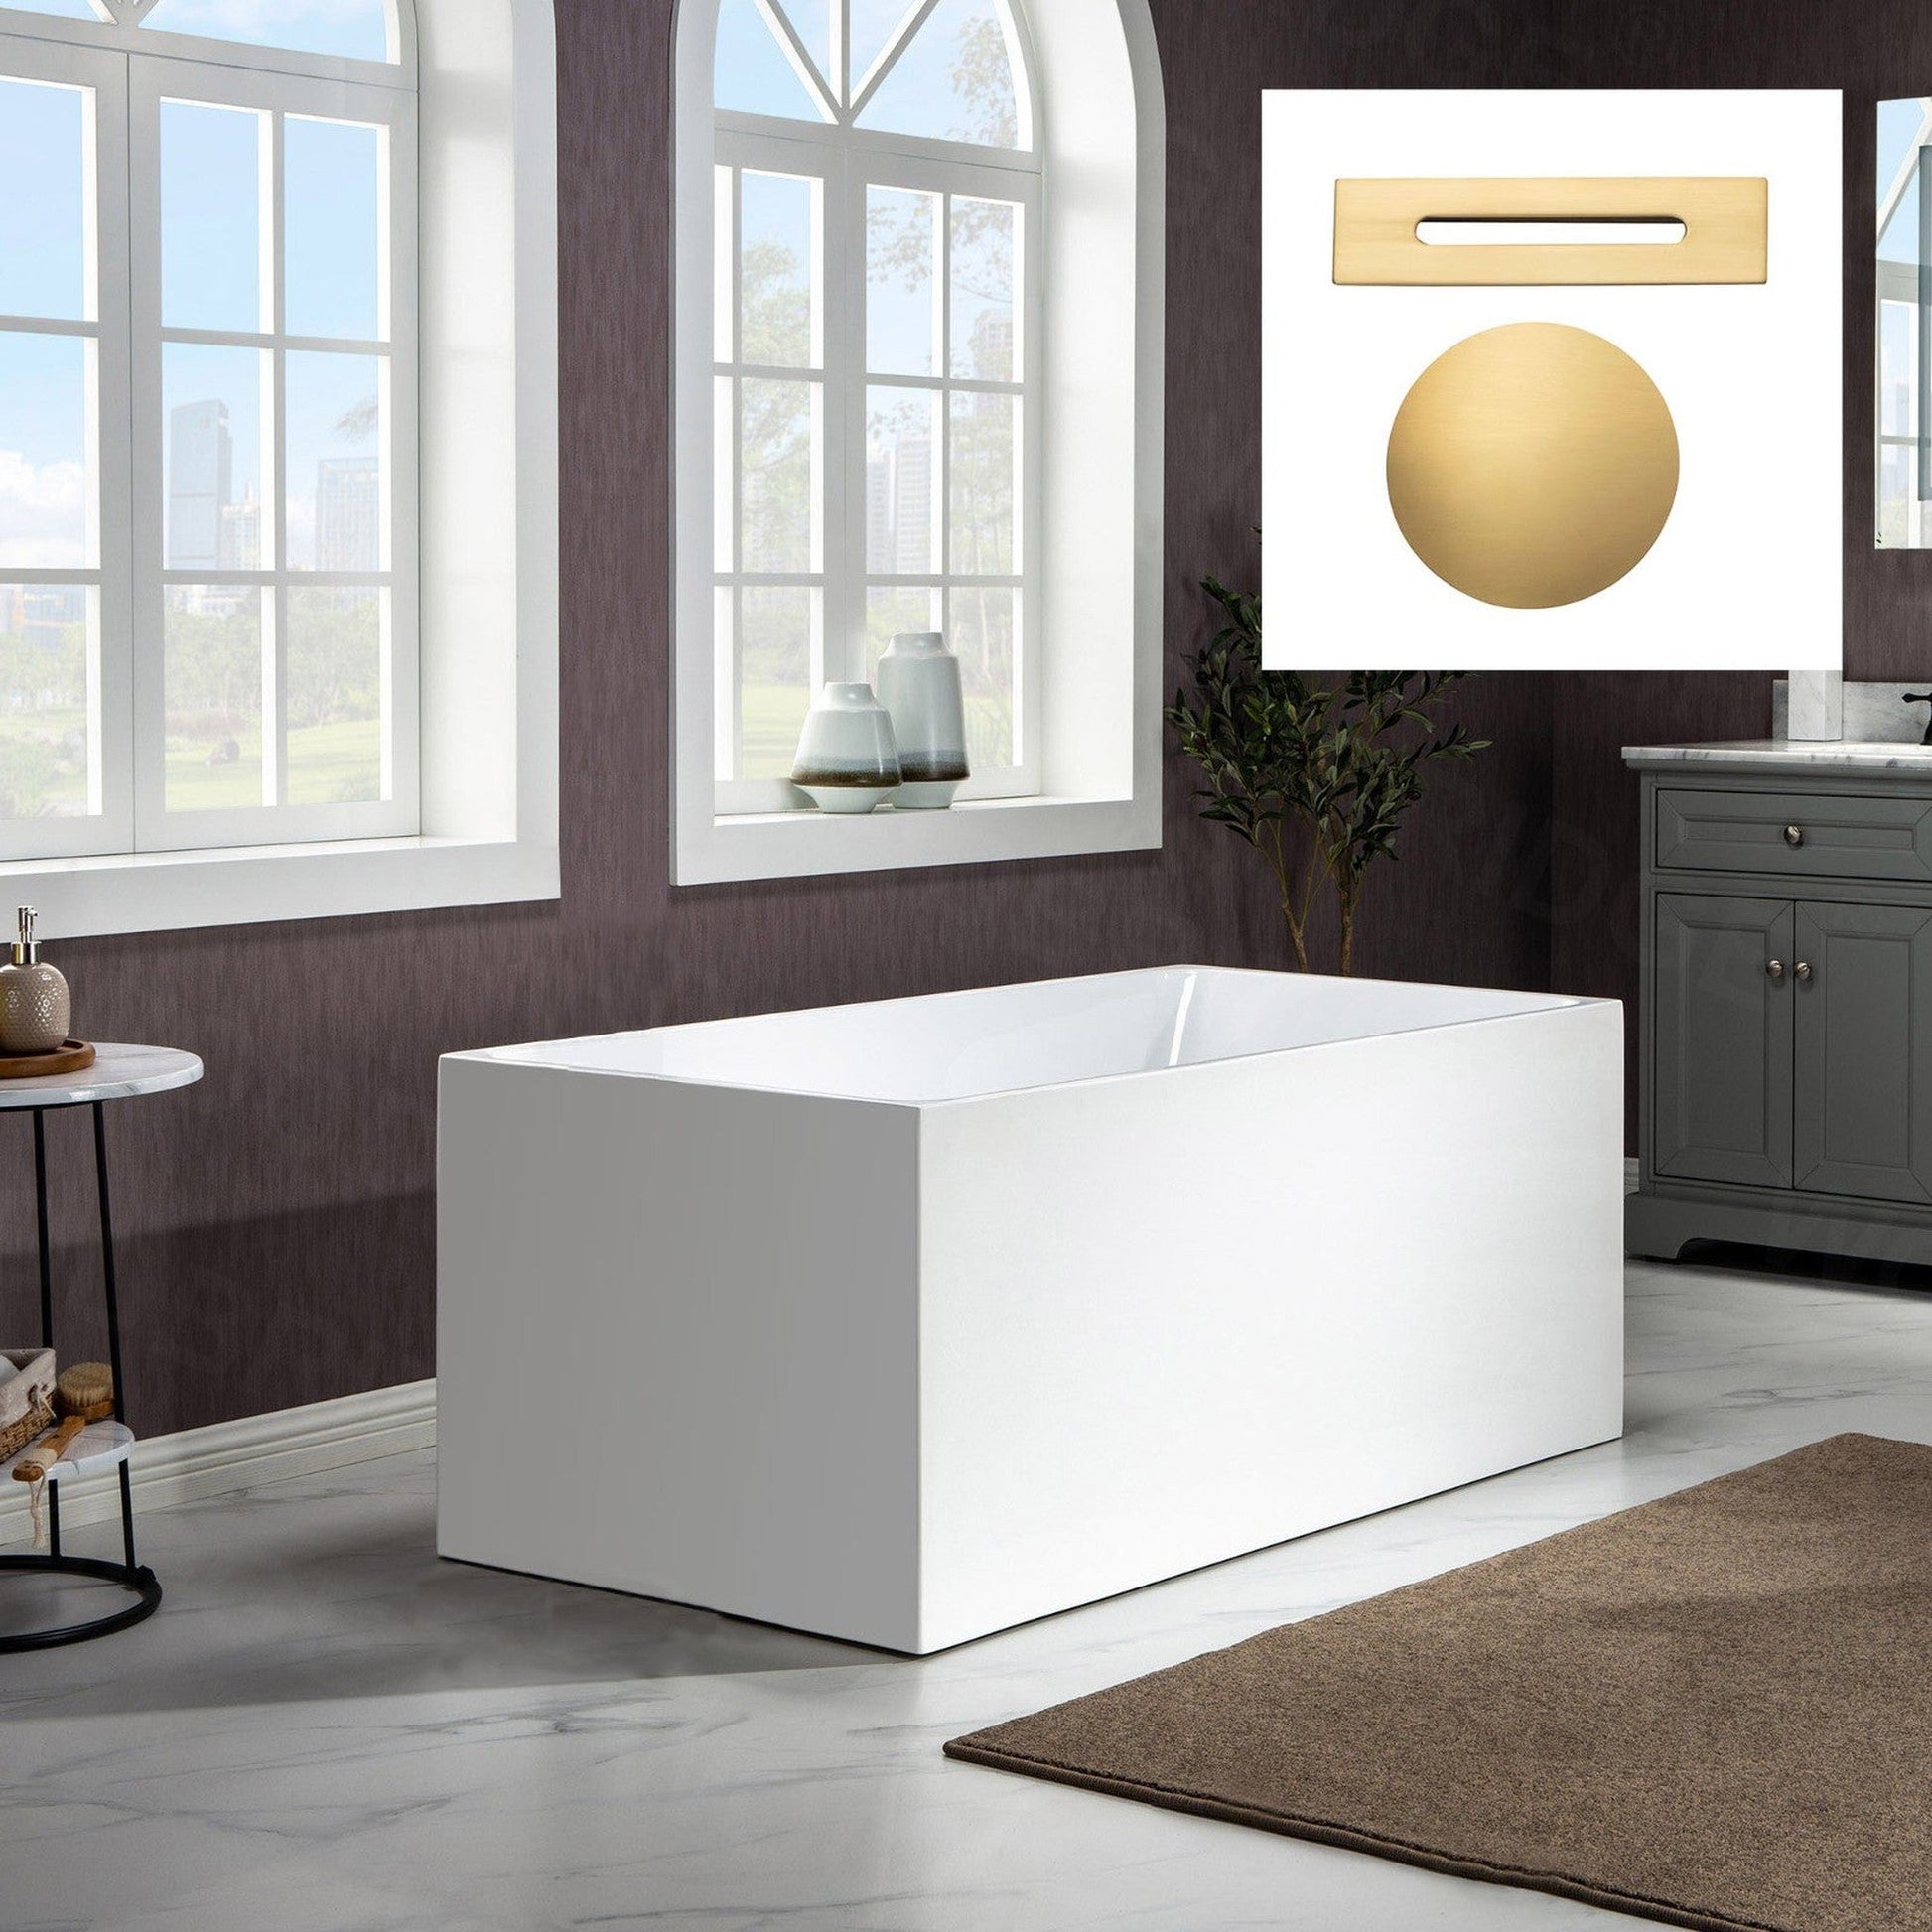 WoodBridge B-0086 67" White Acrylic Freestanding Soaking Bathtub With Brushed Gold Drain, Overflow, F0073BGVT Tub Filler and Caddy Tray